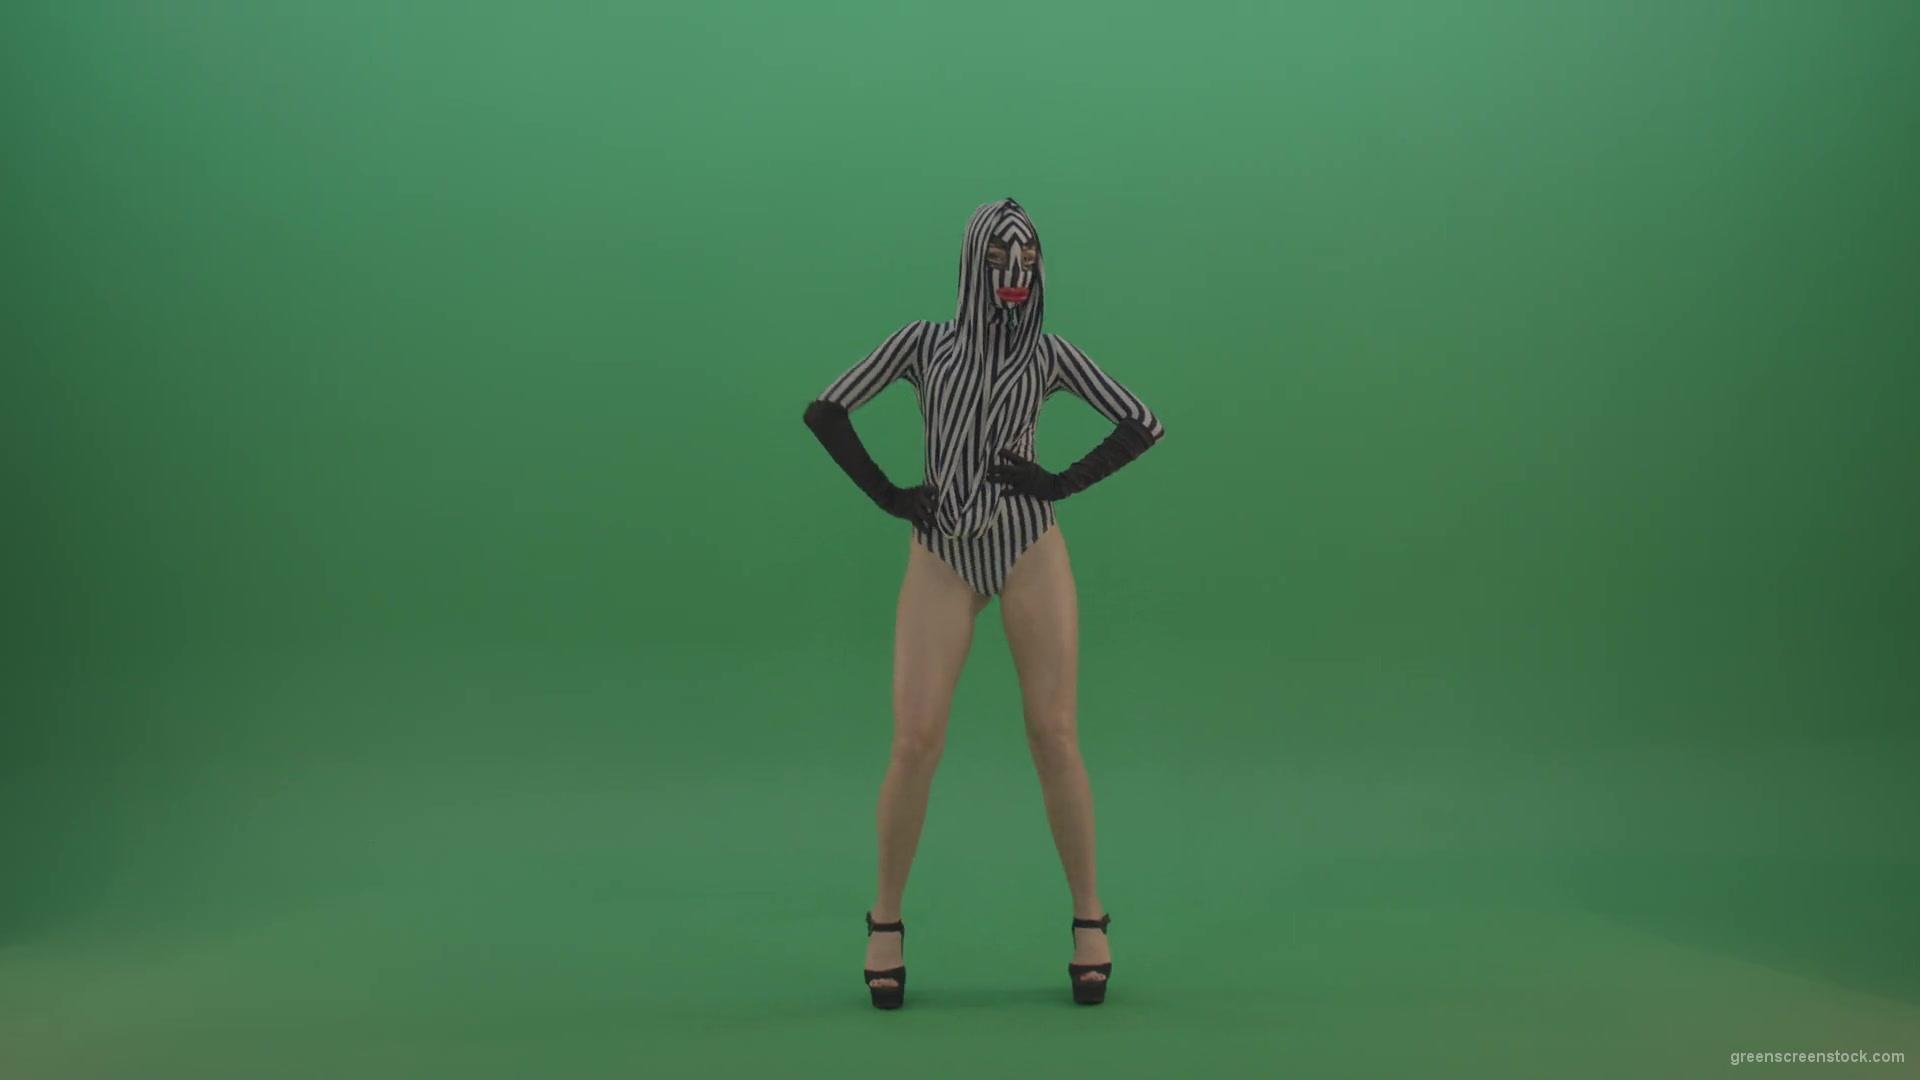 Ass-shake-beats-by-edm-go-go-girl-dance-isolated-on-green-screen-1920_009 Green Screen Stock